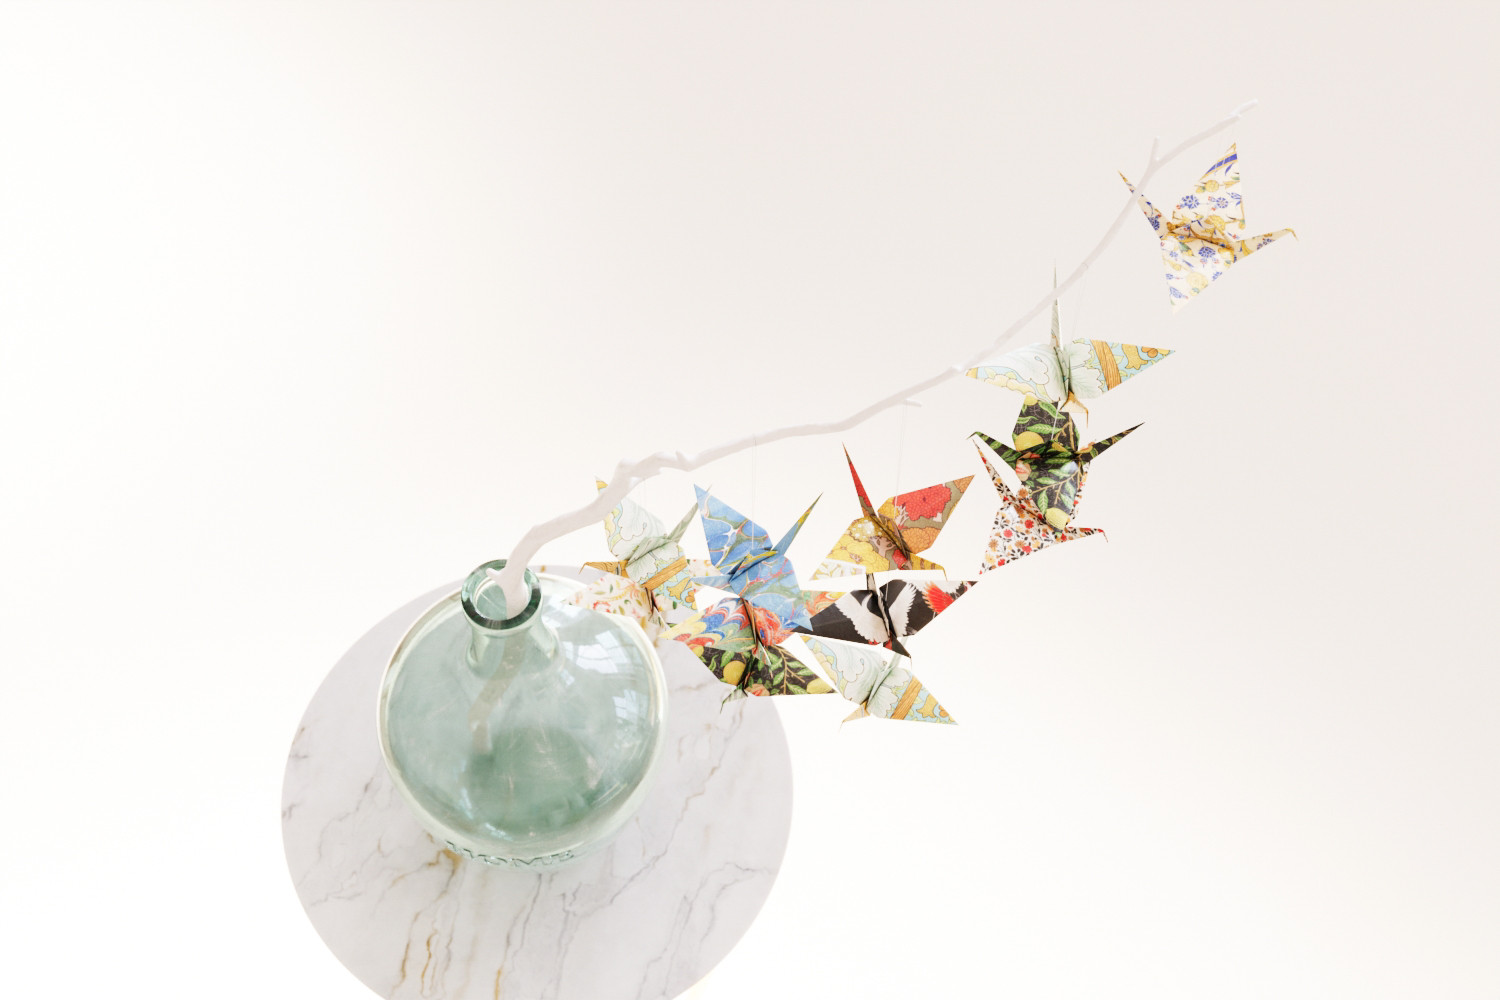 Large glass carboy with decorative origami birds 3D model